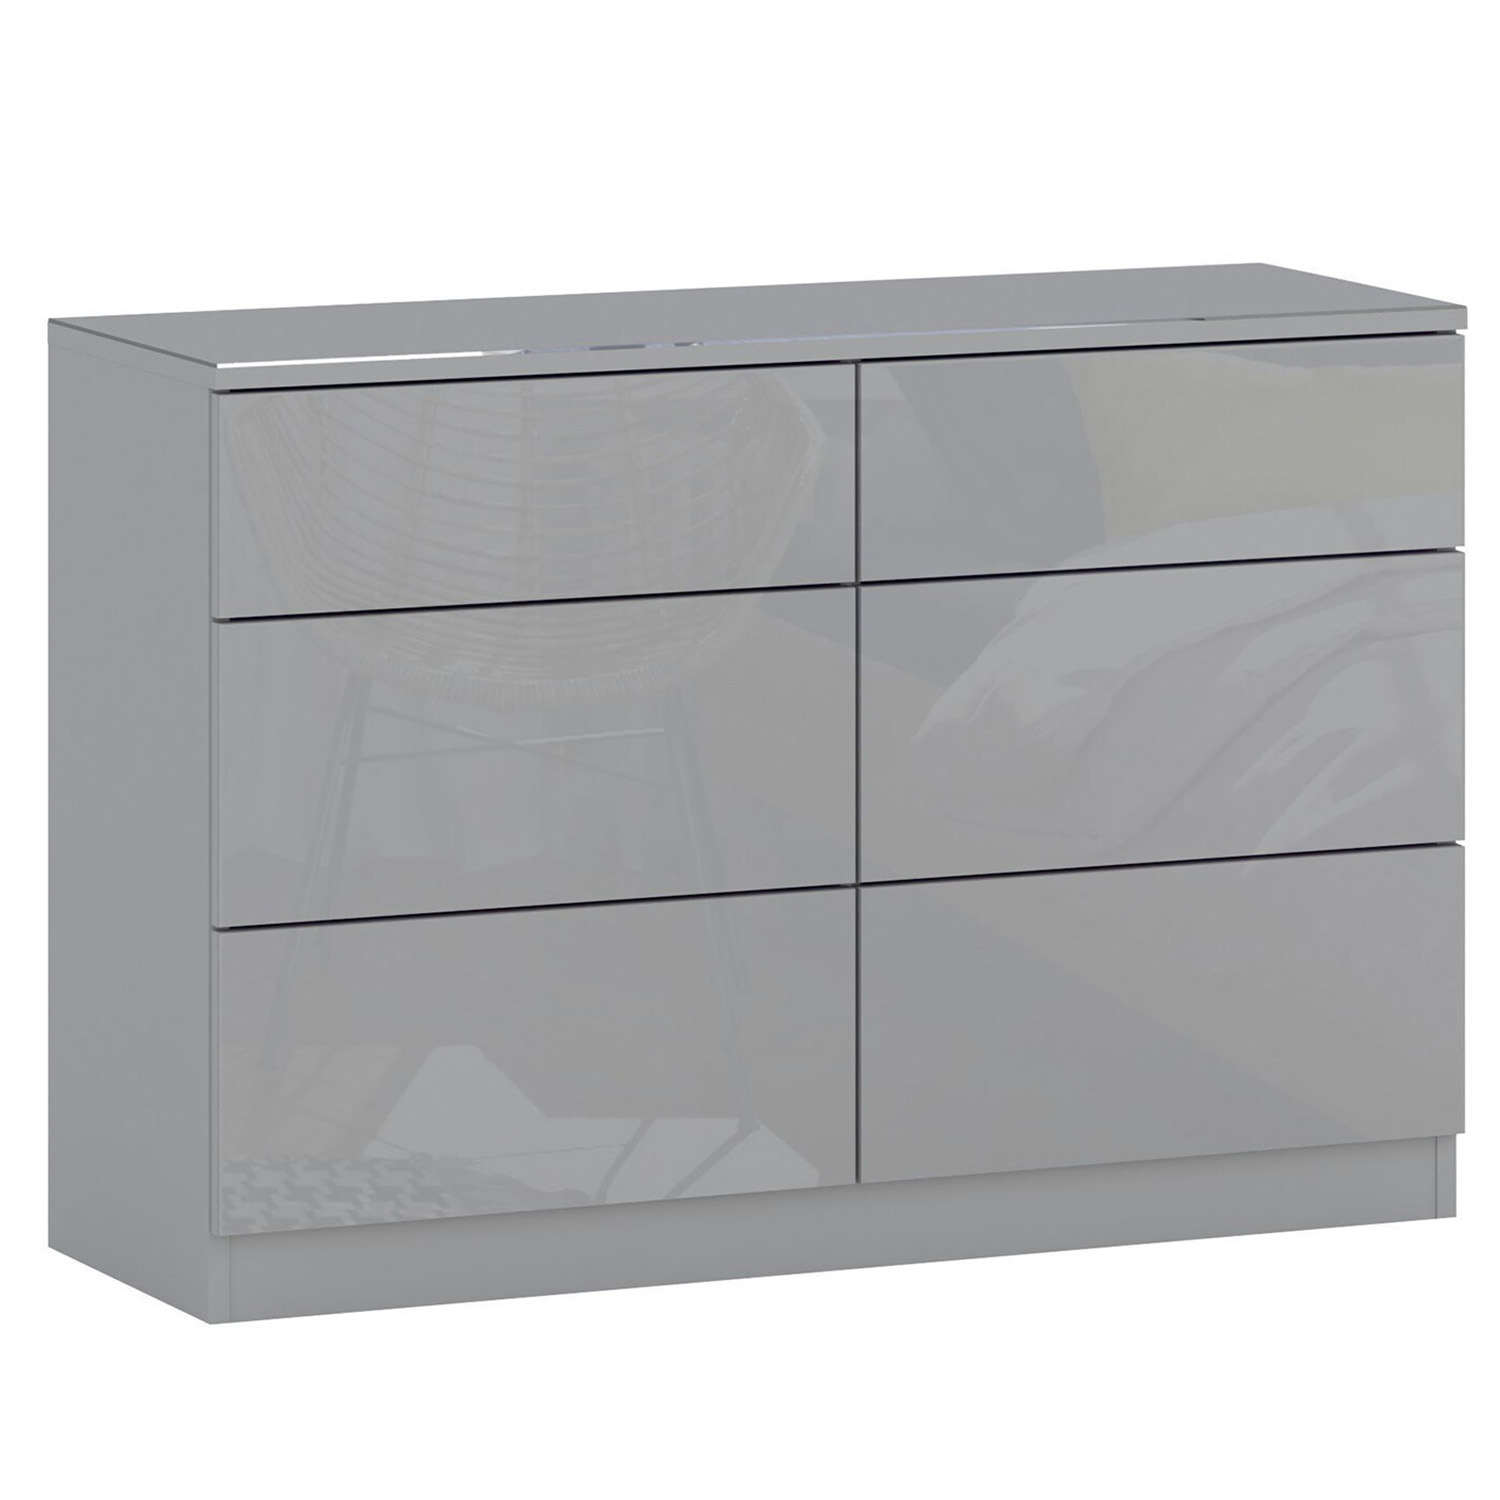 Shard 6 Drawer Glossy Grey Chest of Drawers Image 2